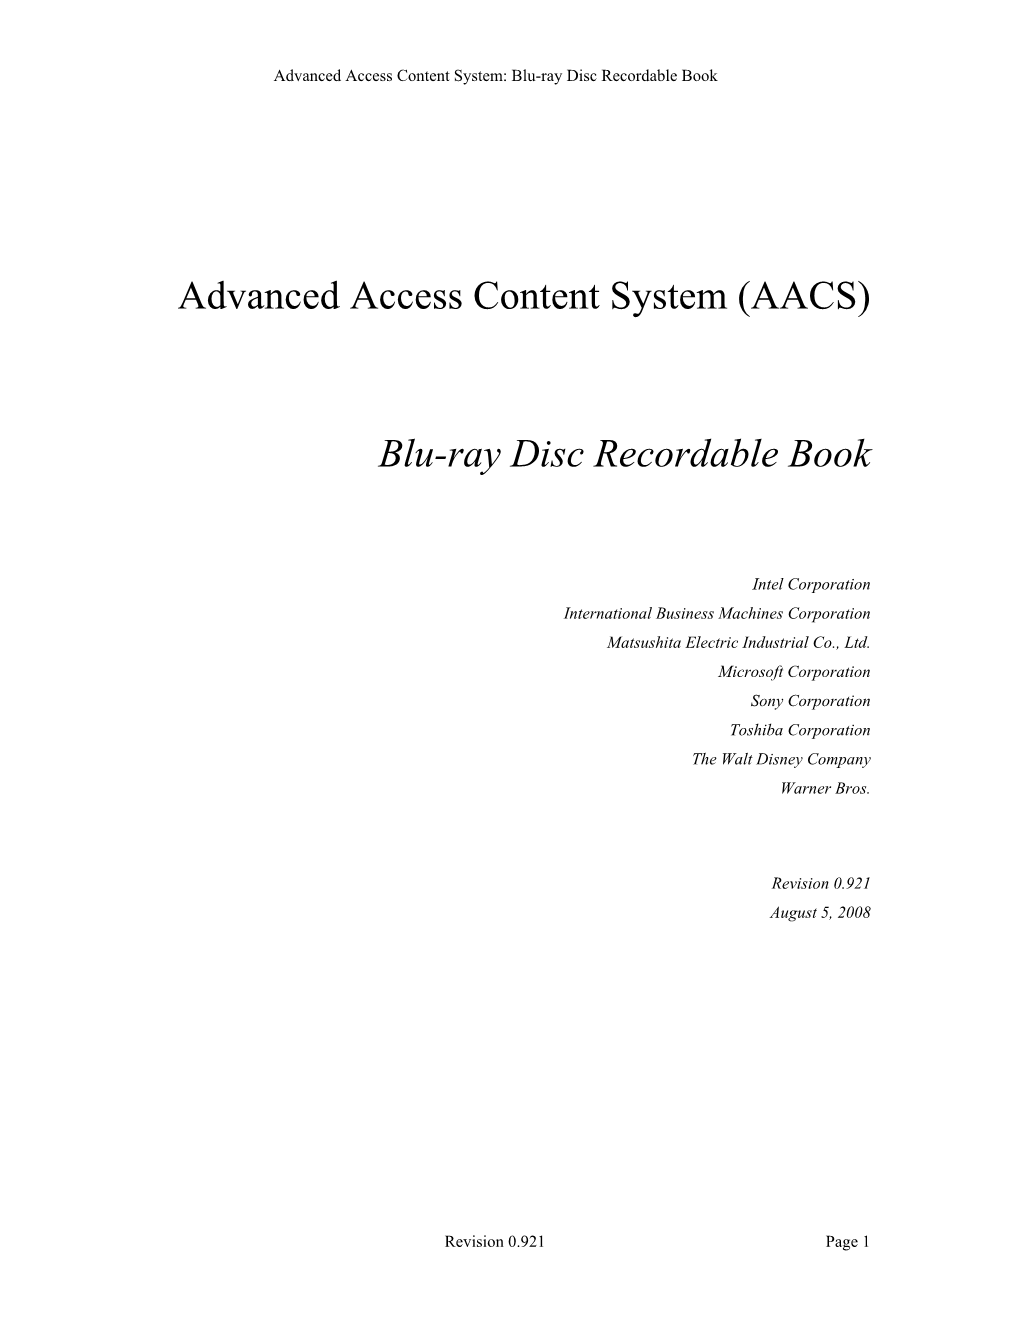 Advanced Access Content System (AACS)